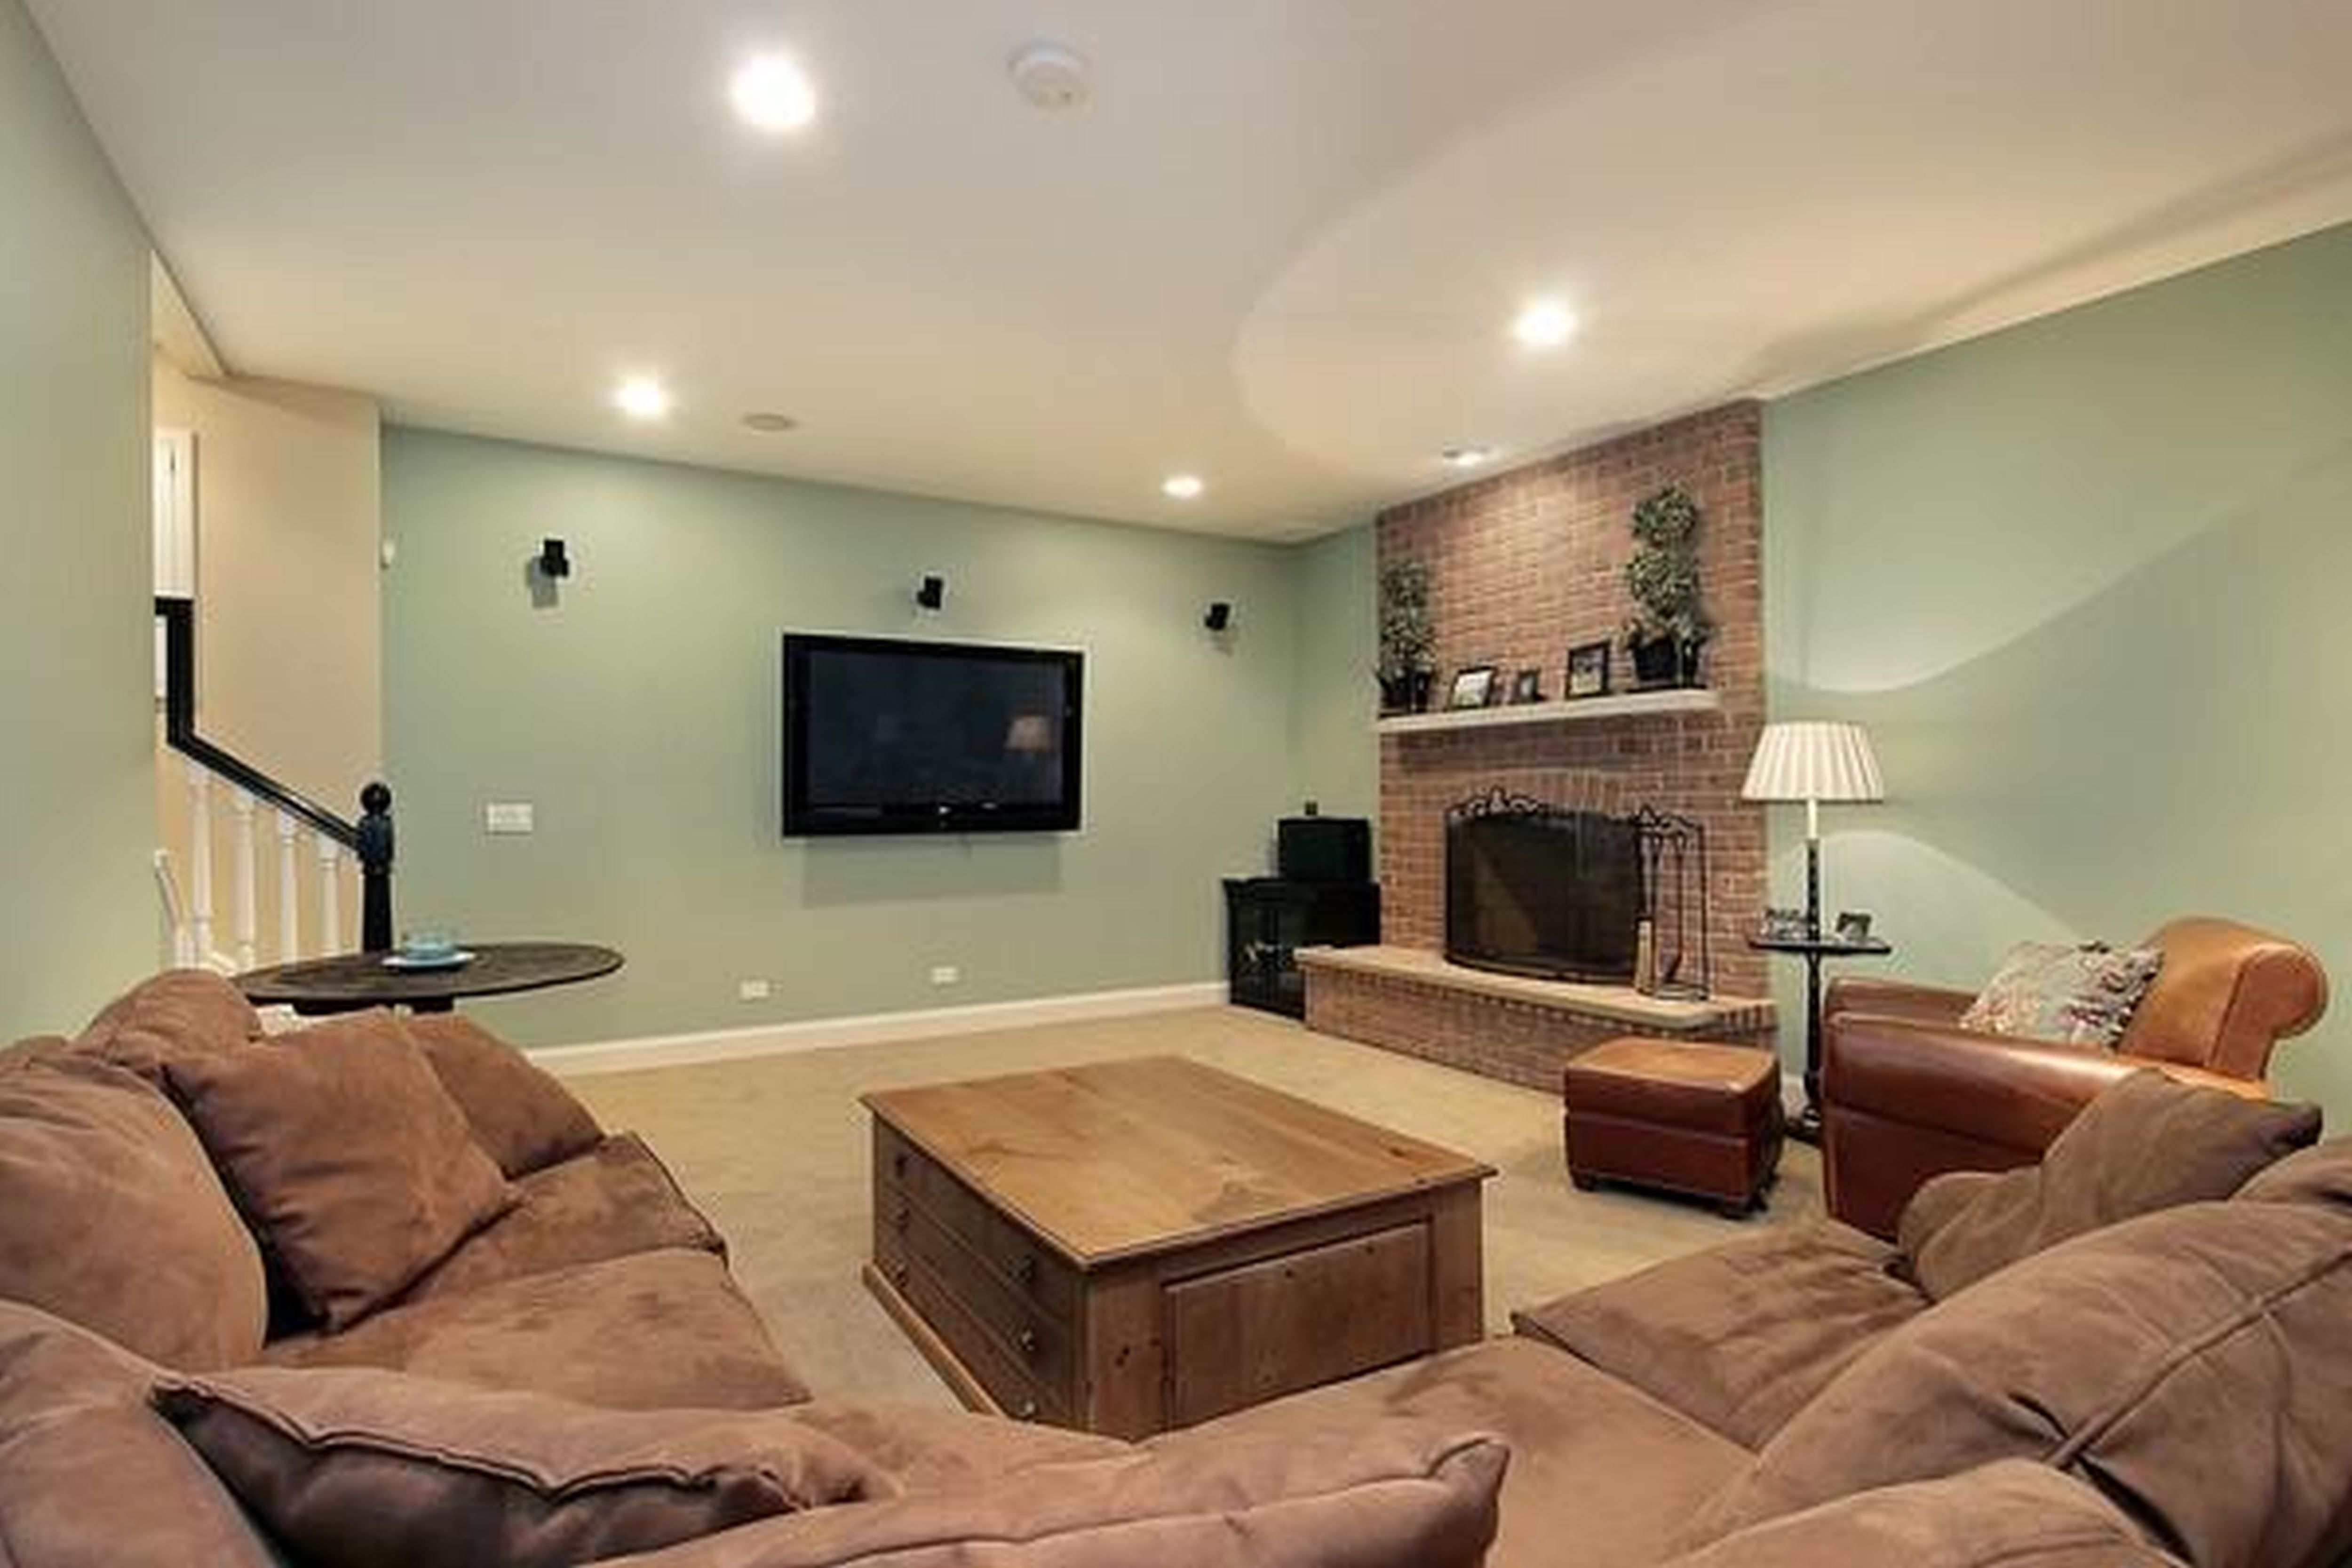 The Potential Below: Maximizing The Use Of Your Basement